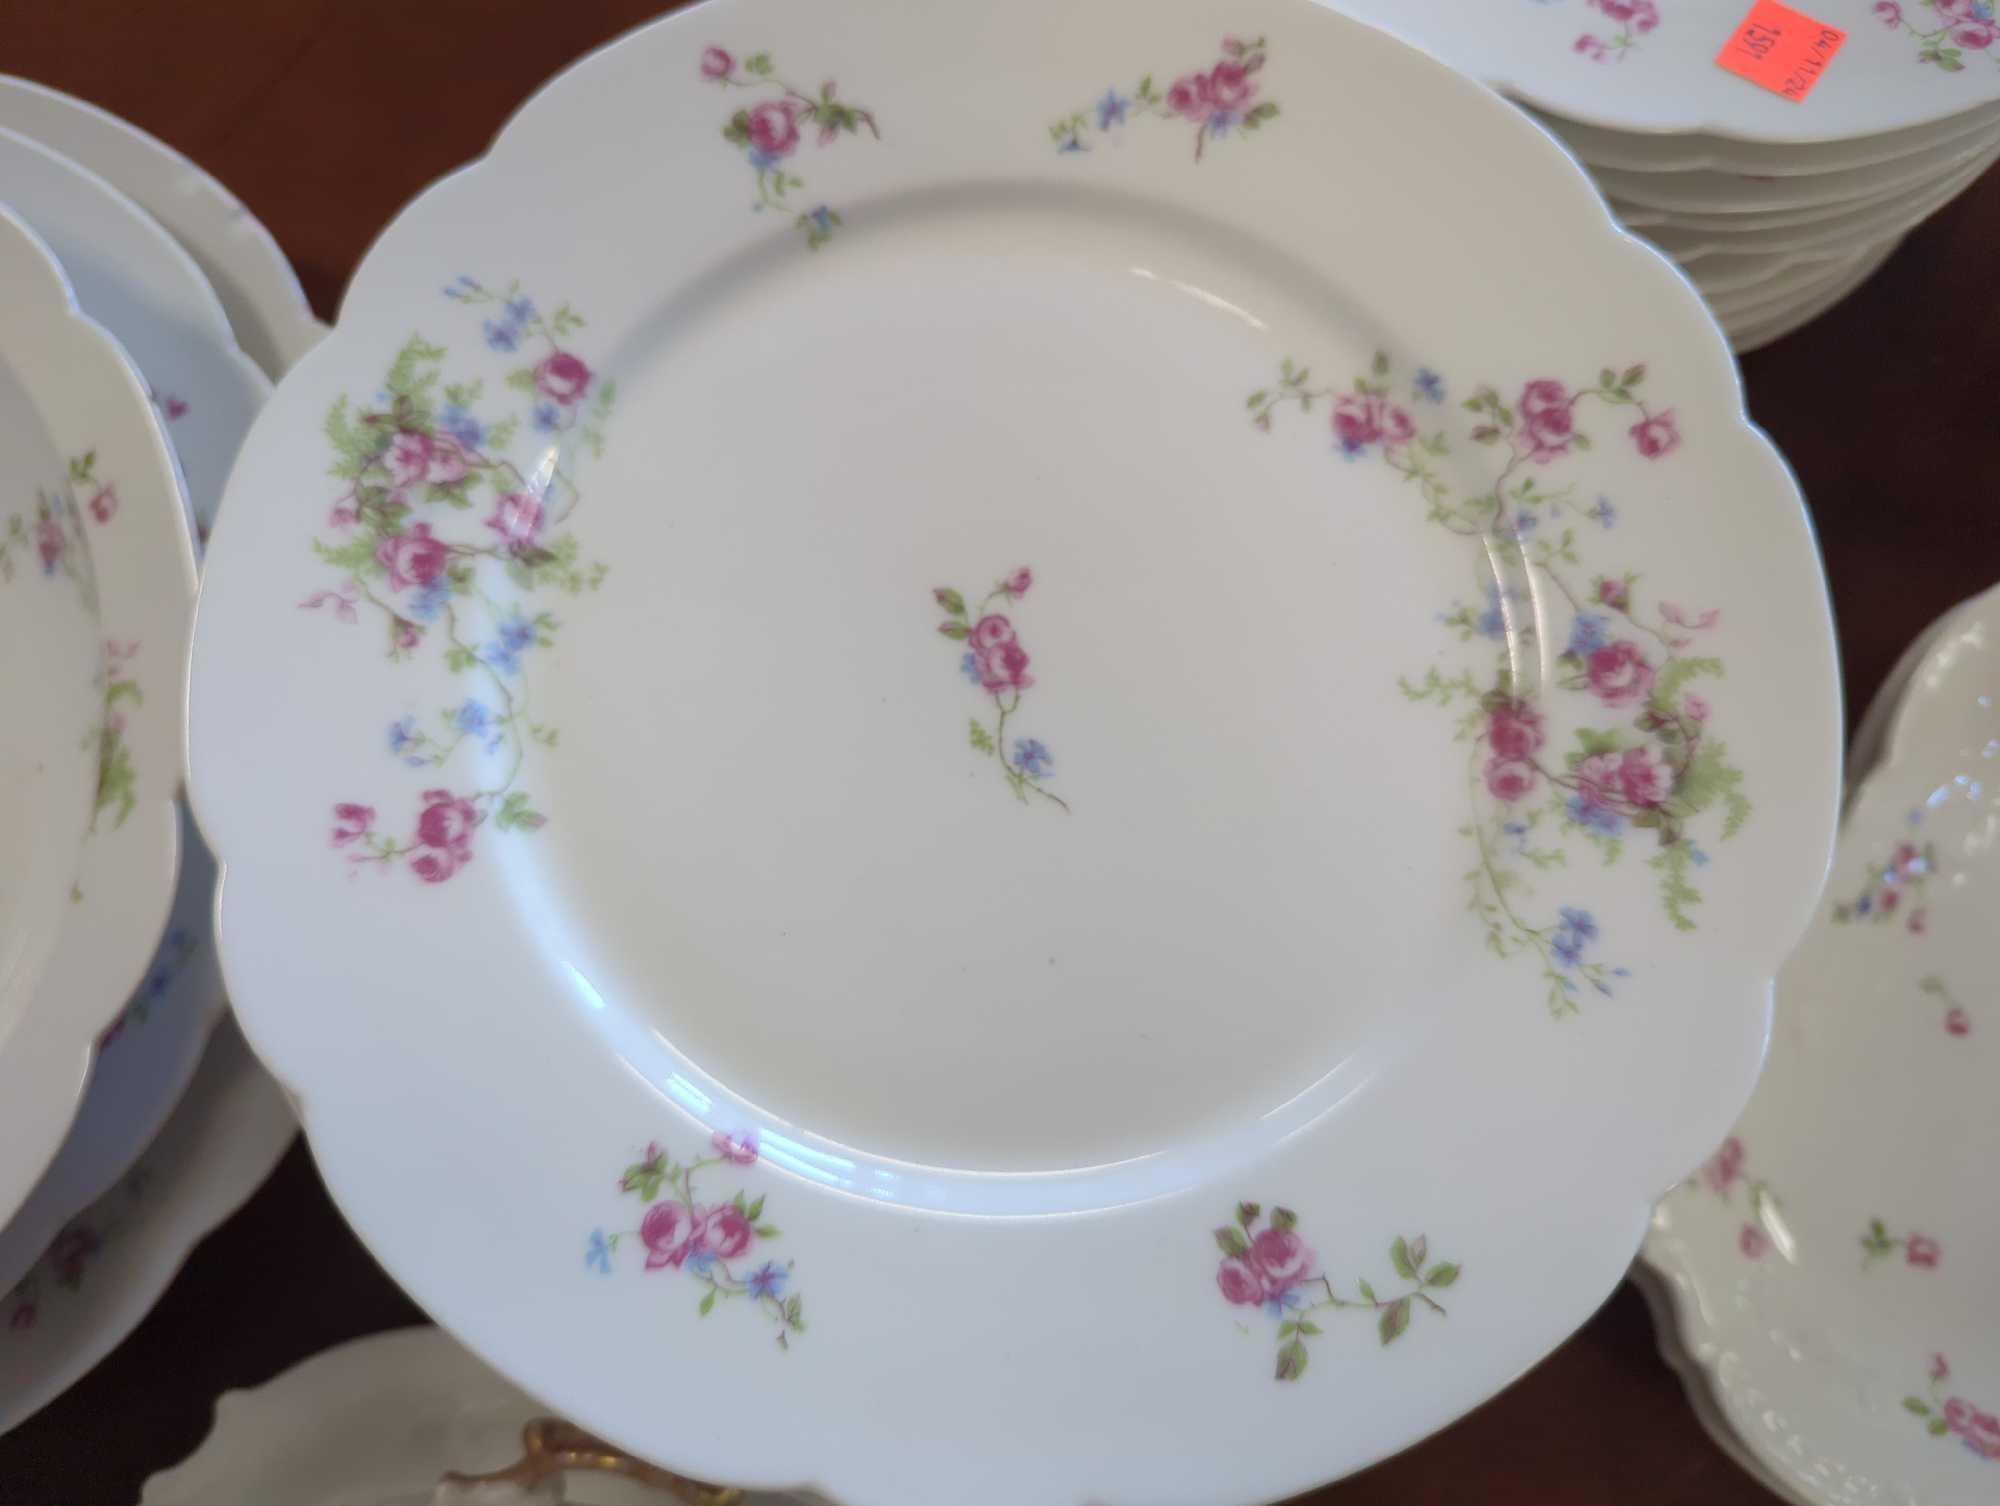 57 Piece of Haviland Limoges Schleiger Antique Dinner Service With Pink Flowers, Some of the Ware